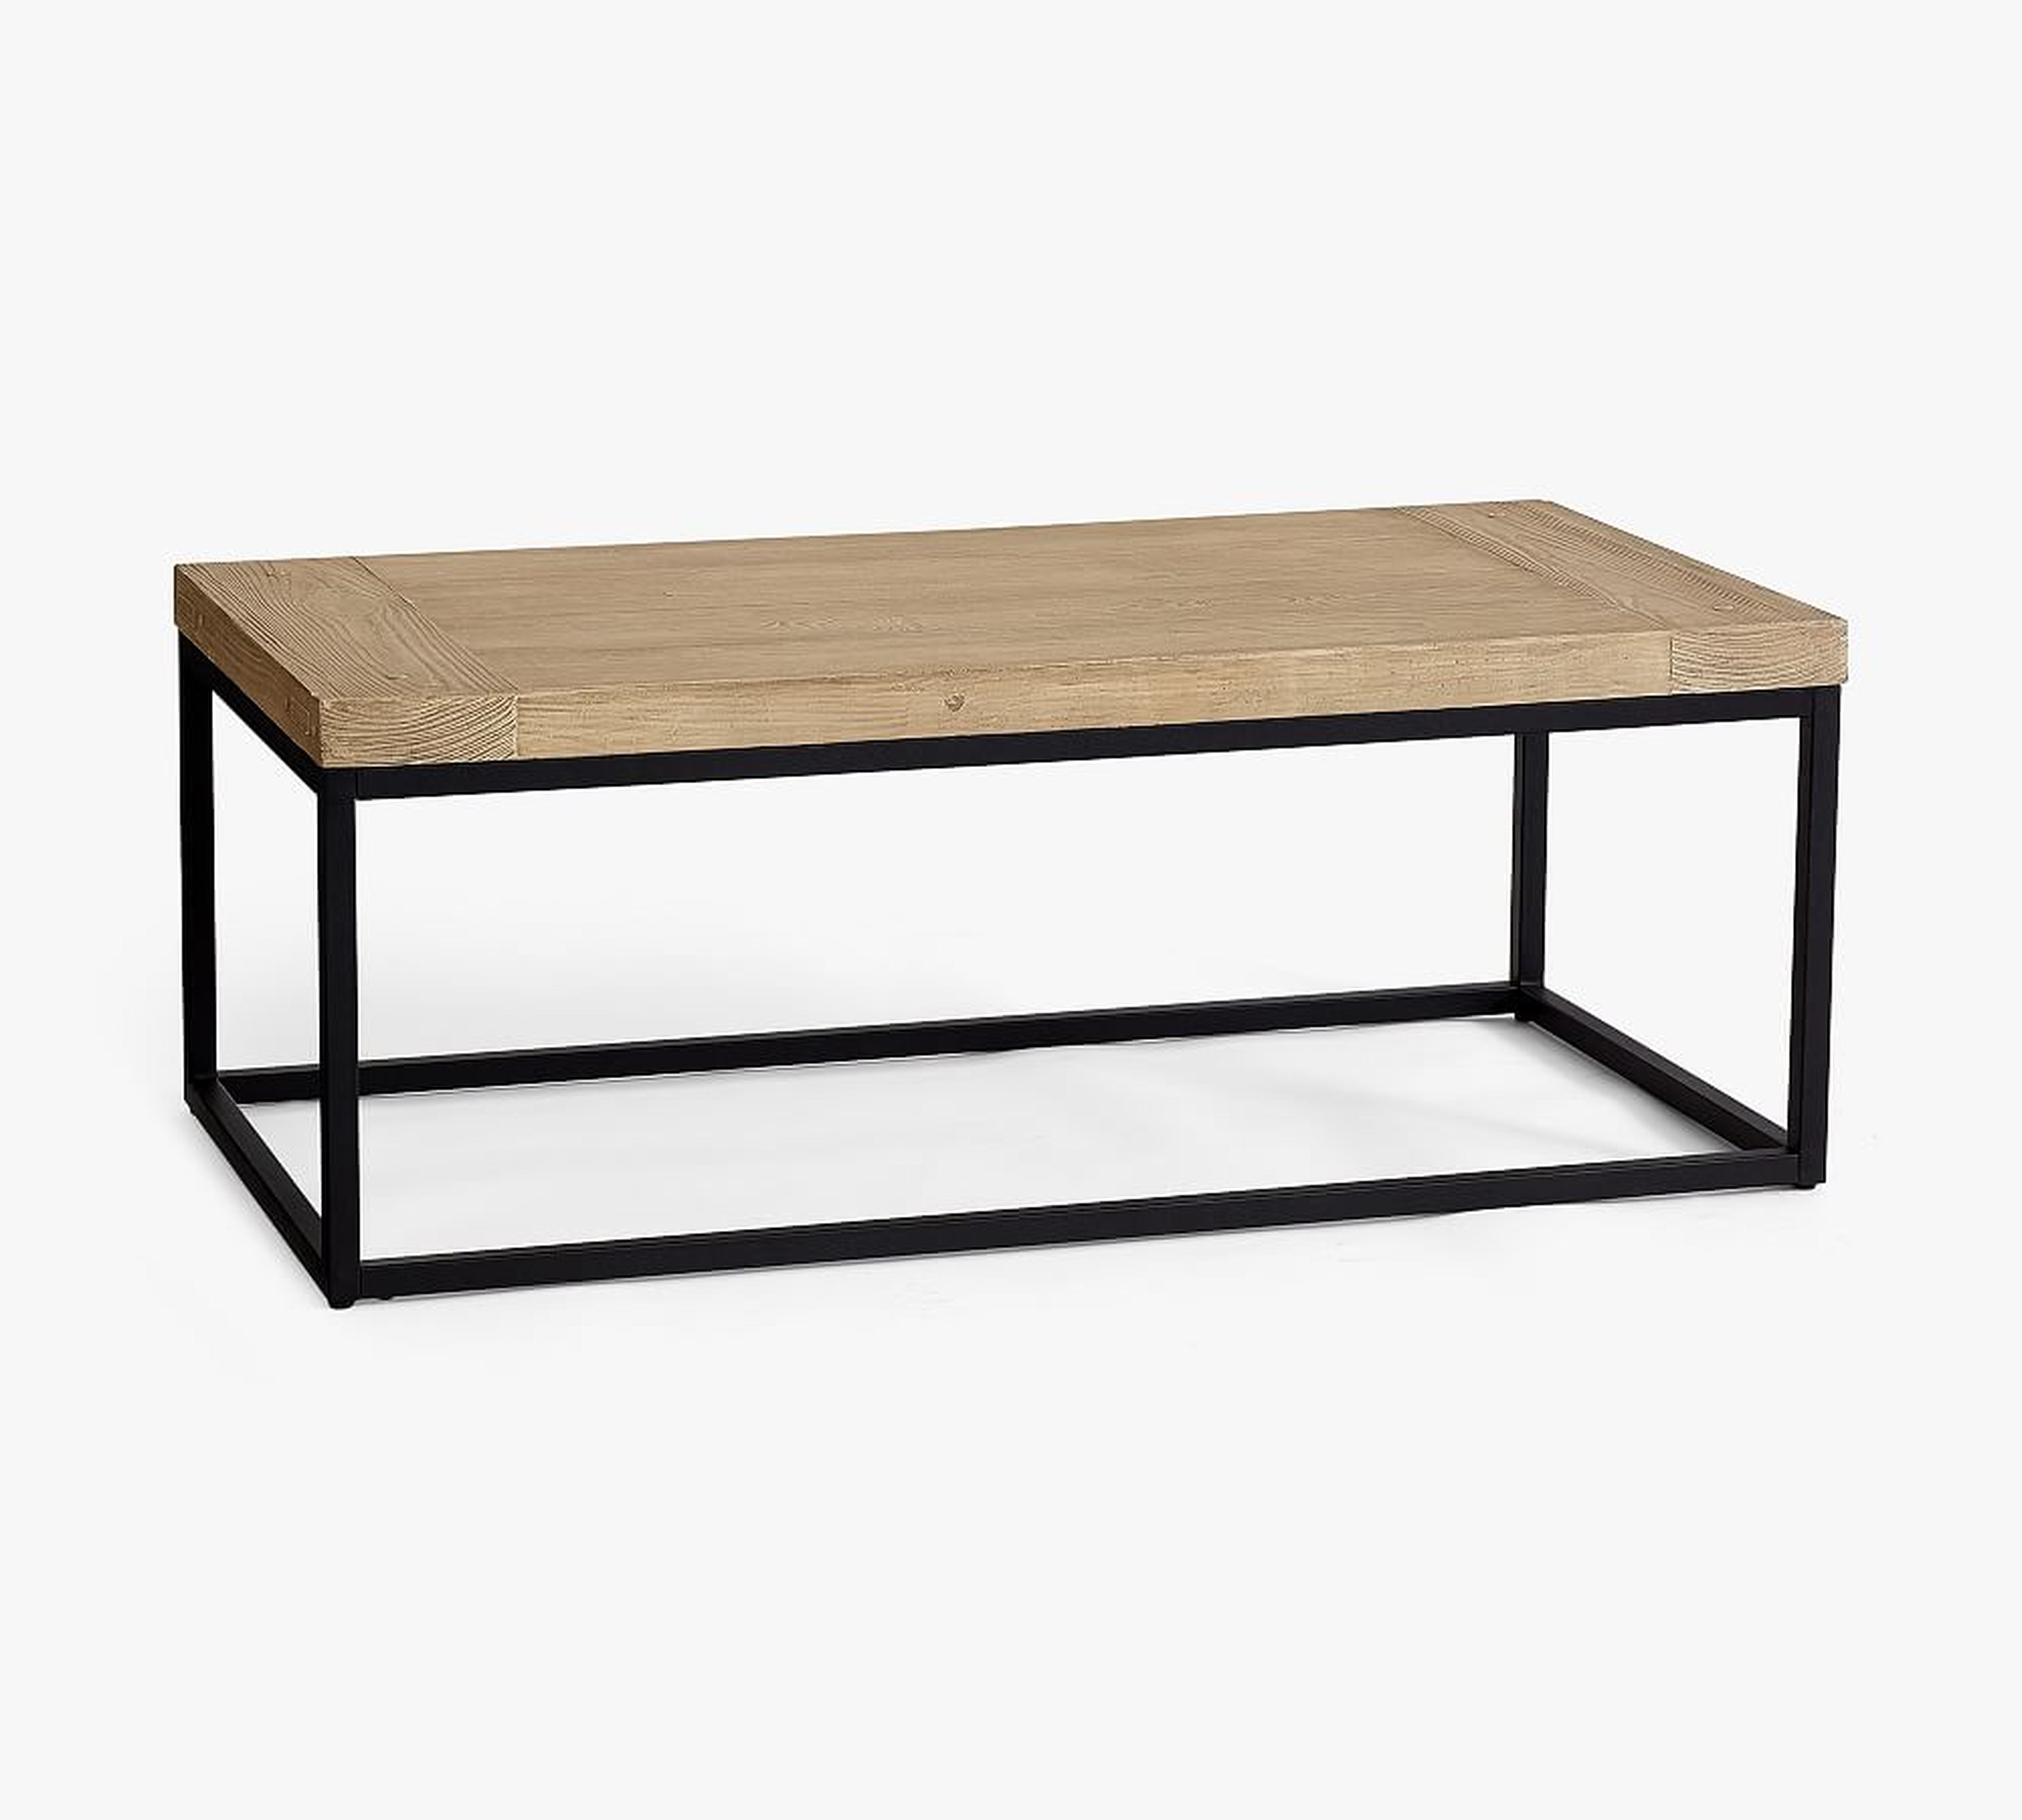 Malcolm Outdoor Rectangular Coffee Table - Pottery Barn